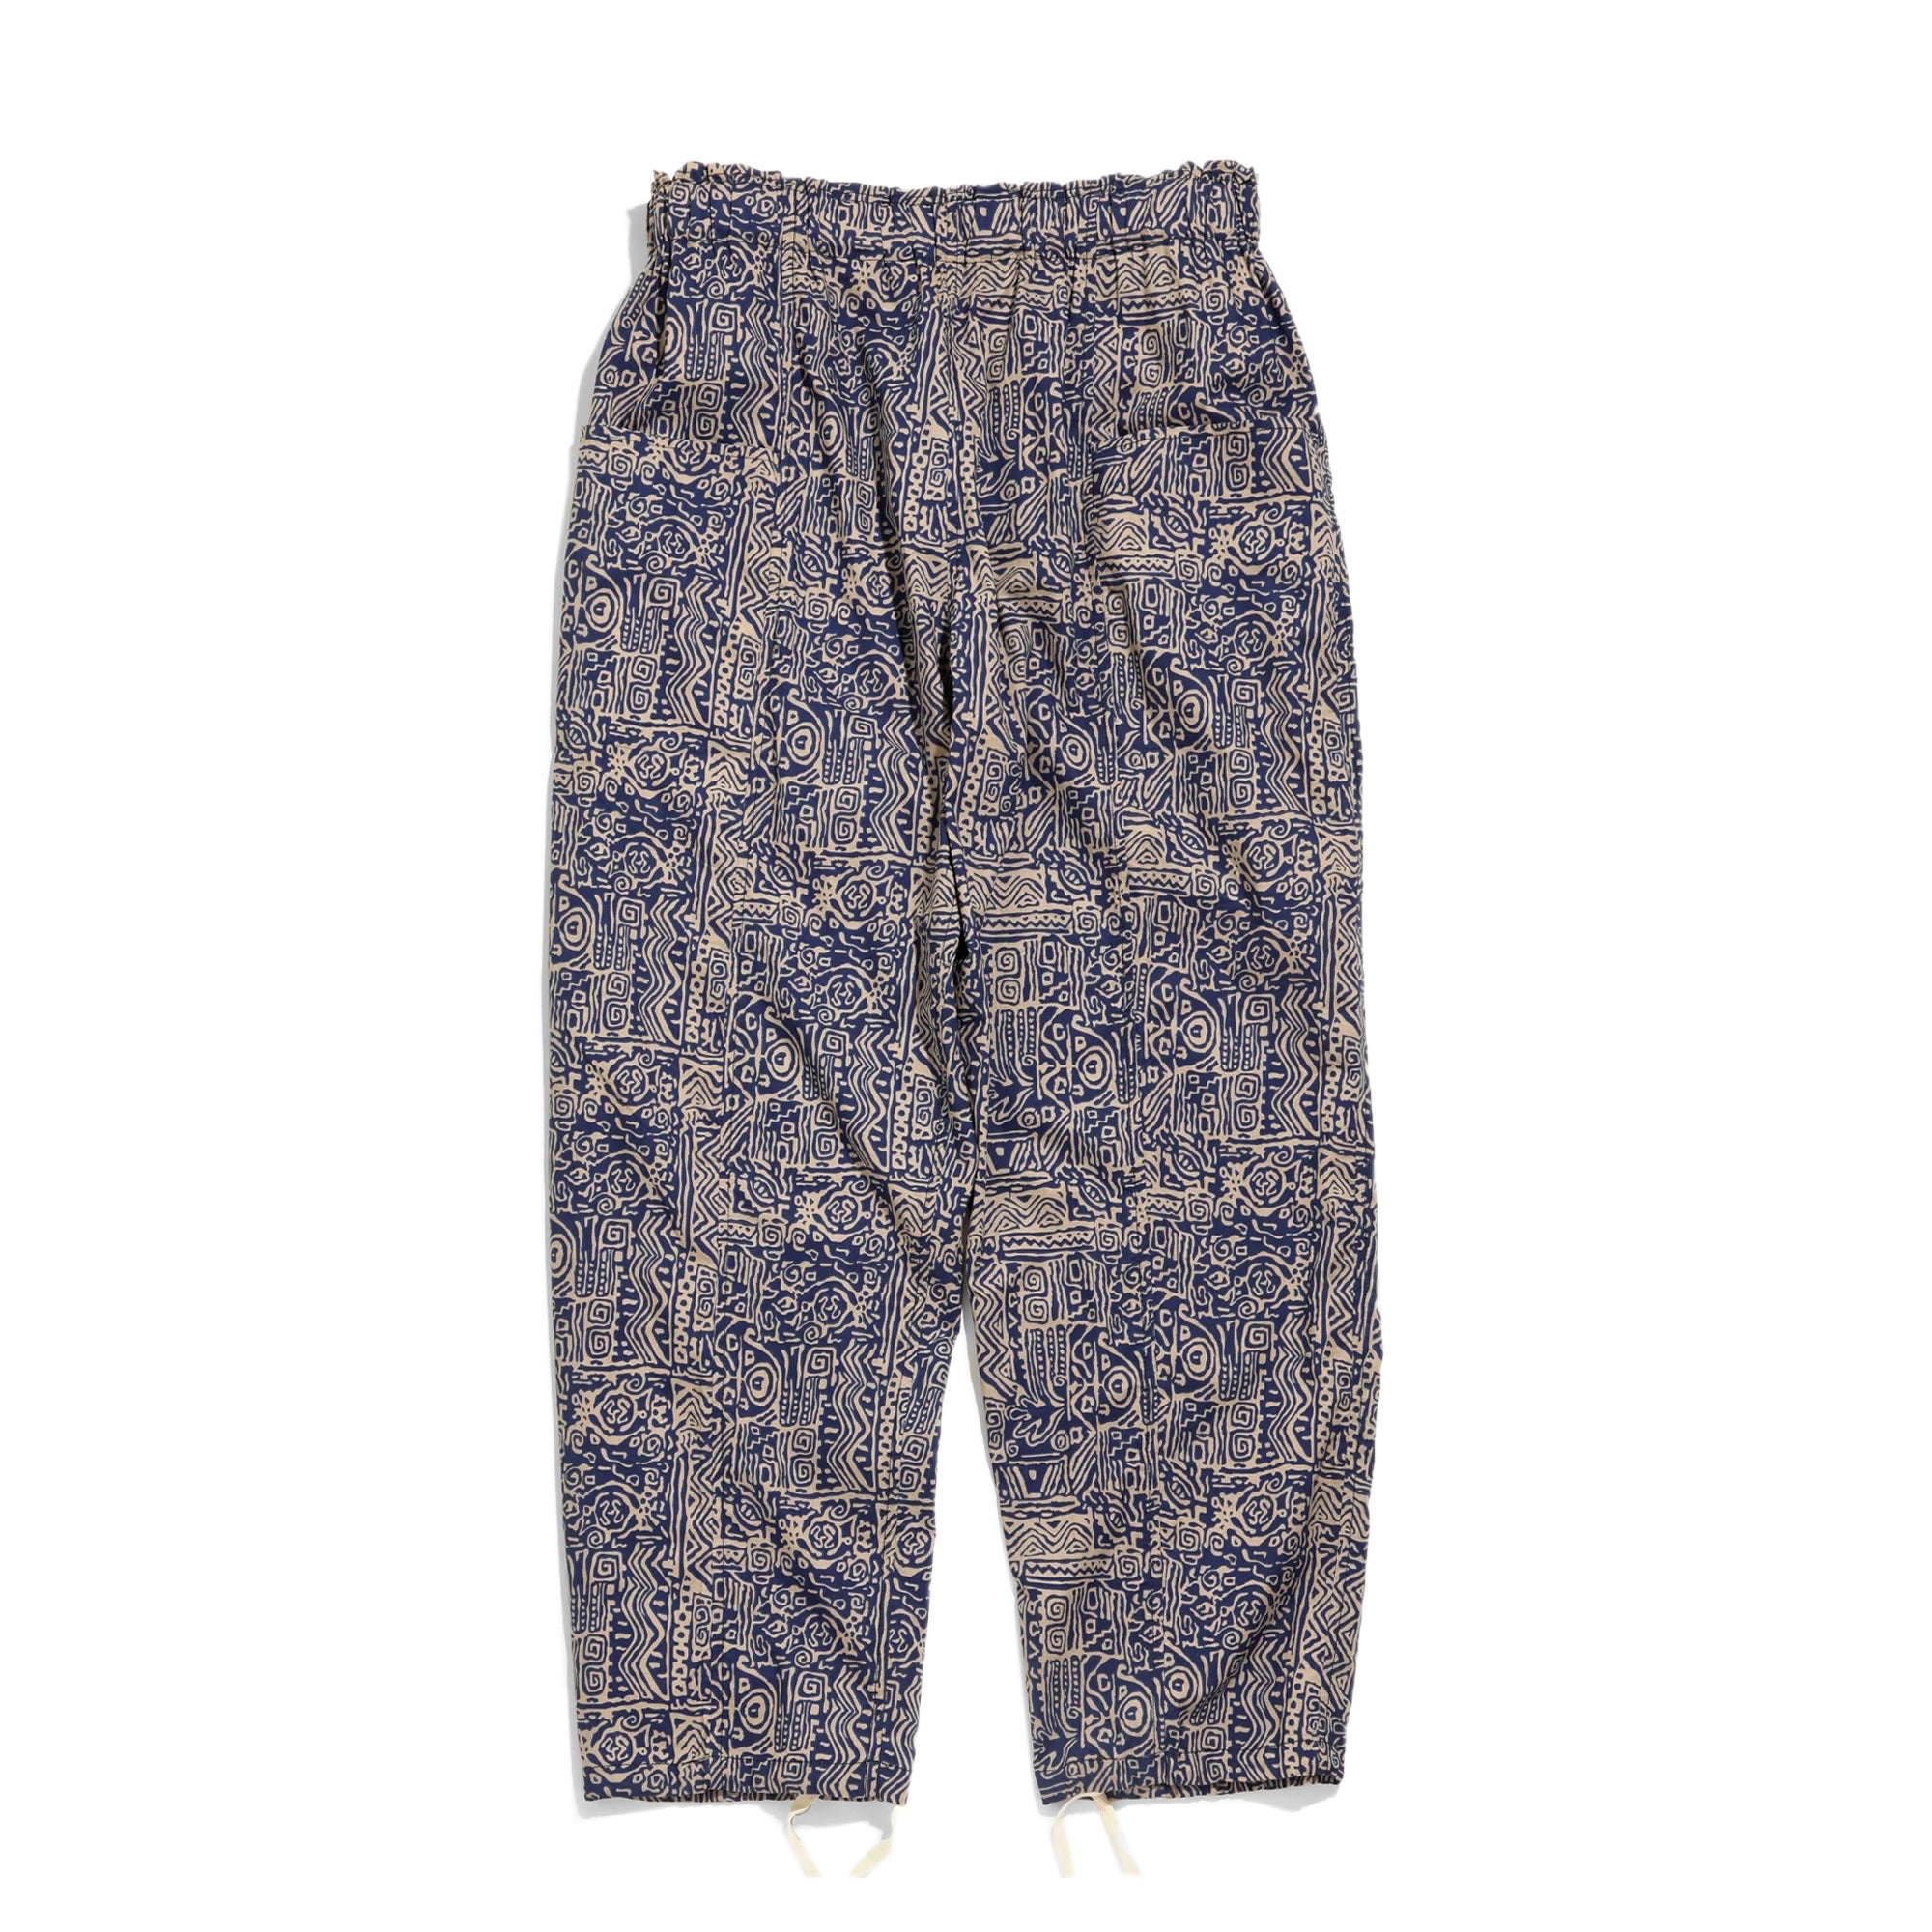 South2 West8 Mens Army String Pants Navy